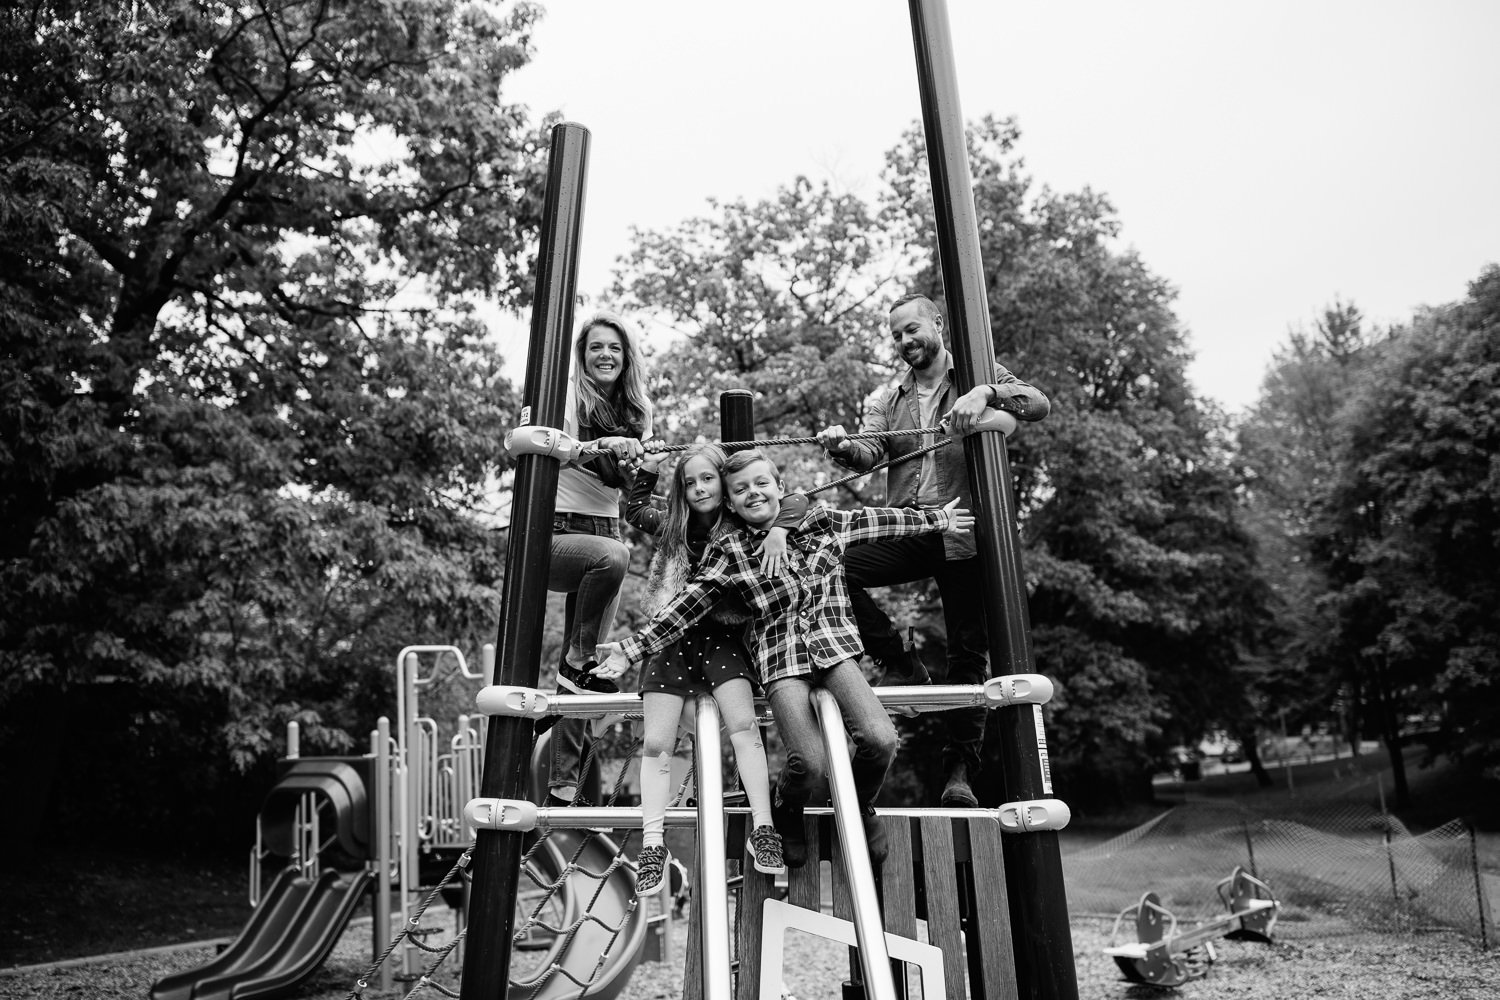 family of 4 standing on jungle gym at city park, 7 year old girl hugging brother, 9 year old boy with arms stretch out, mom and dad standing behind - Newmarket Lifestyle Photos